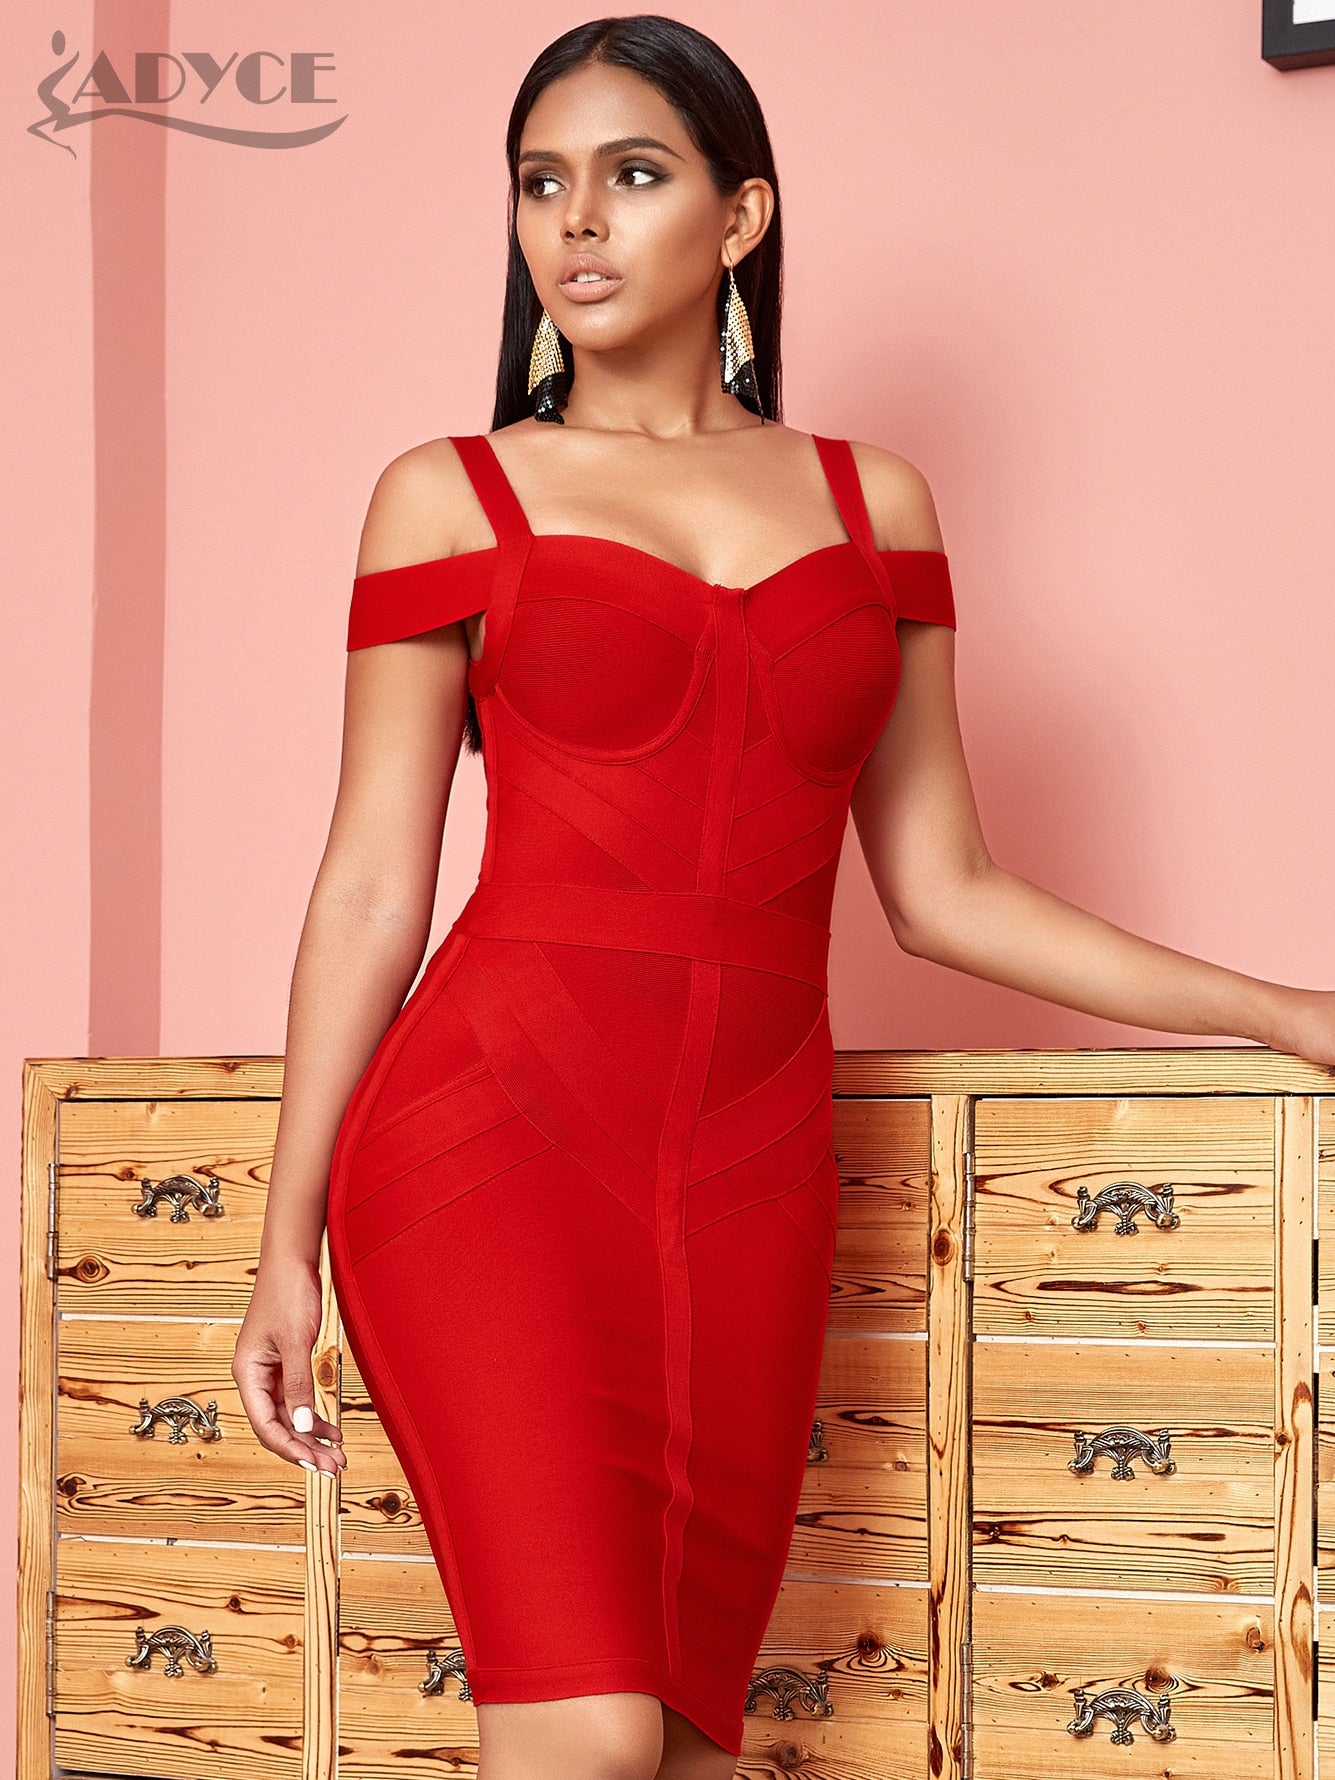 ADYCE Off Shoulder Bodycon Bandage Dress Women Sexy Red Spaghetti Strap Knee Length Club Celebrity Evening Runway Party Dresses PAP SHOP 42